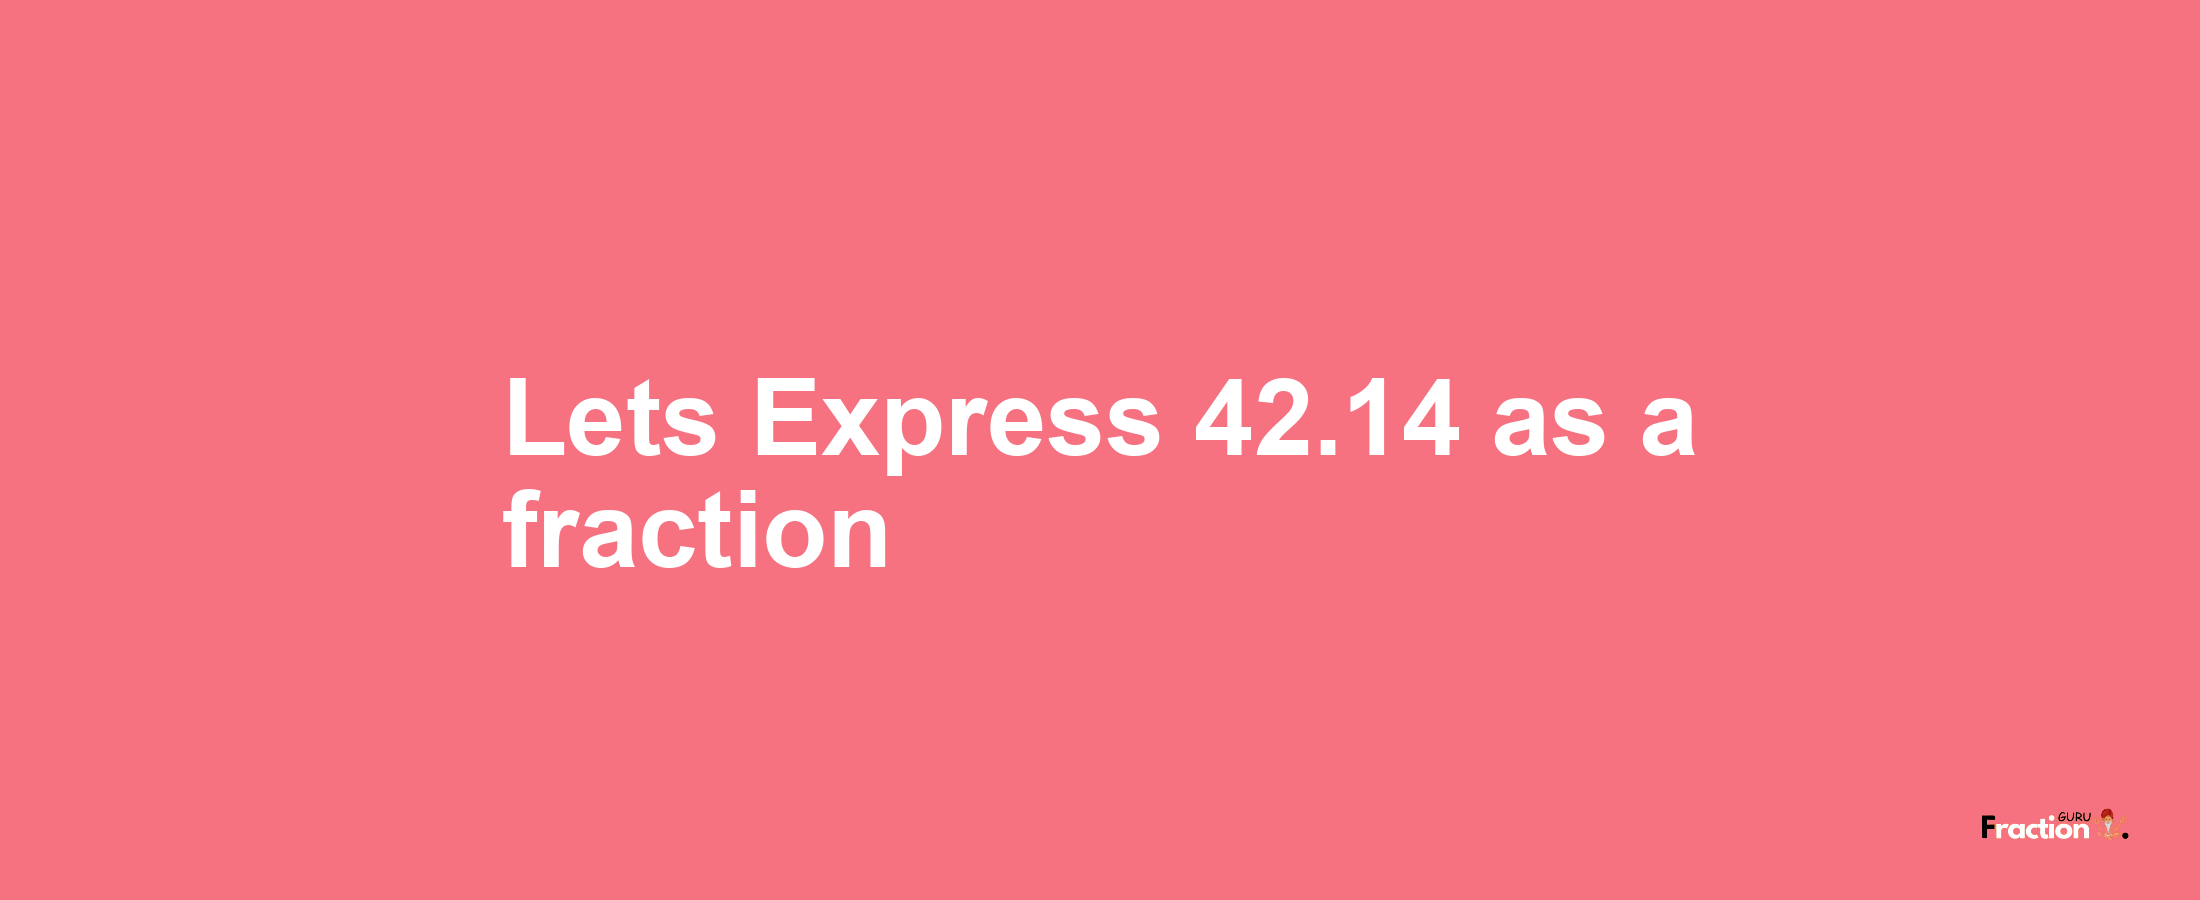 Lets Express 42.14 as afraction